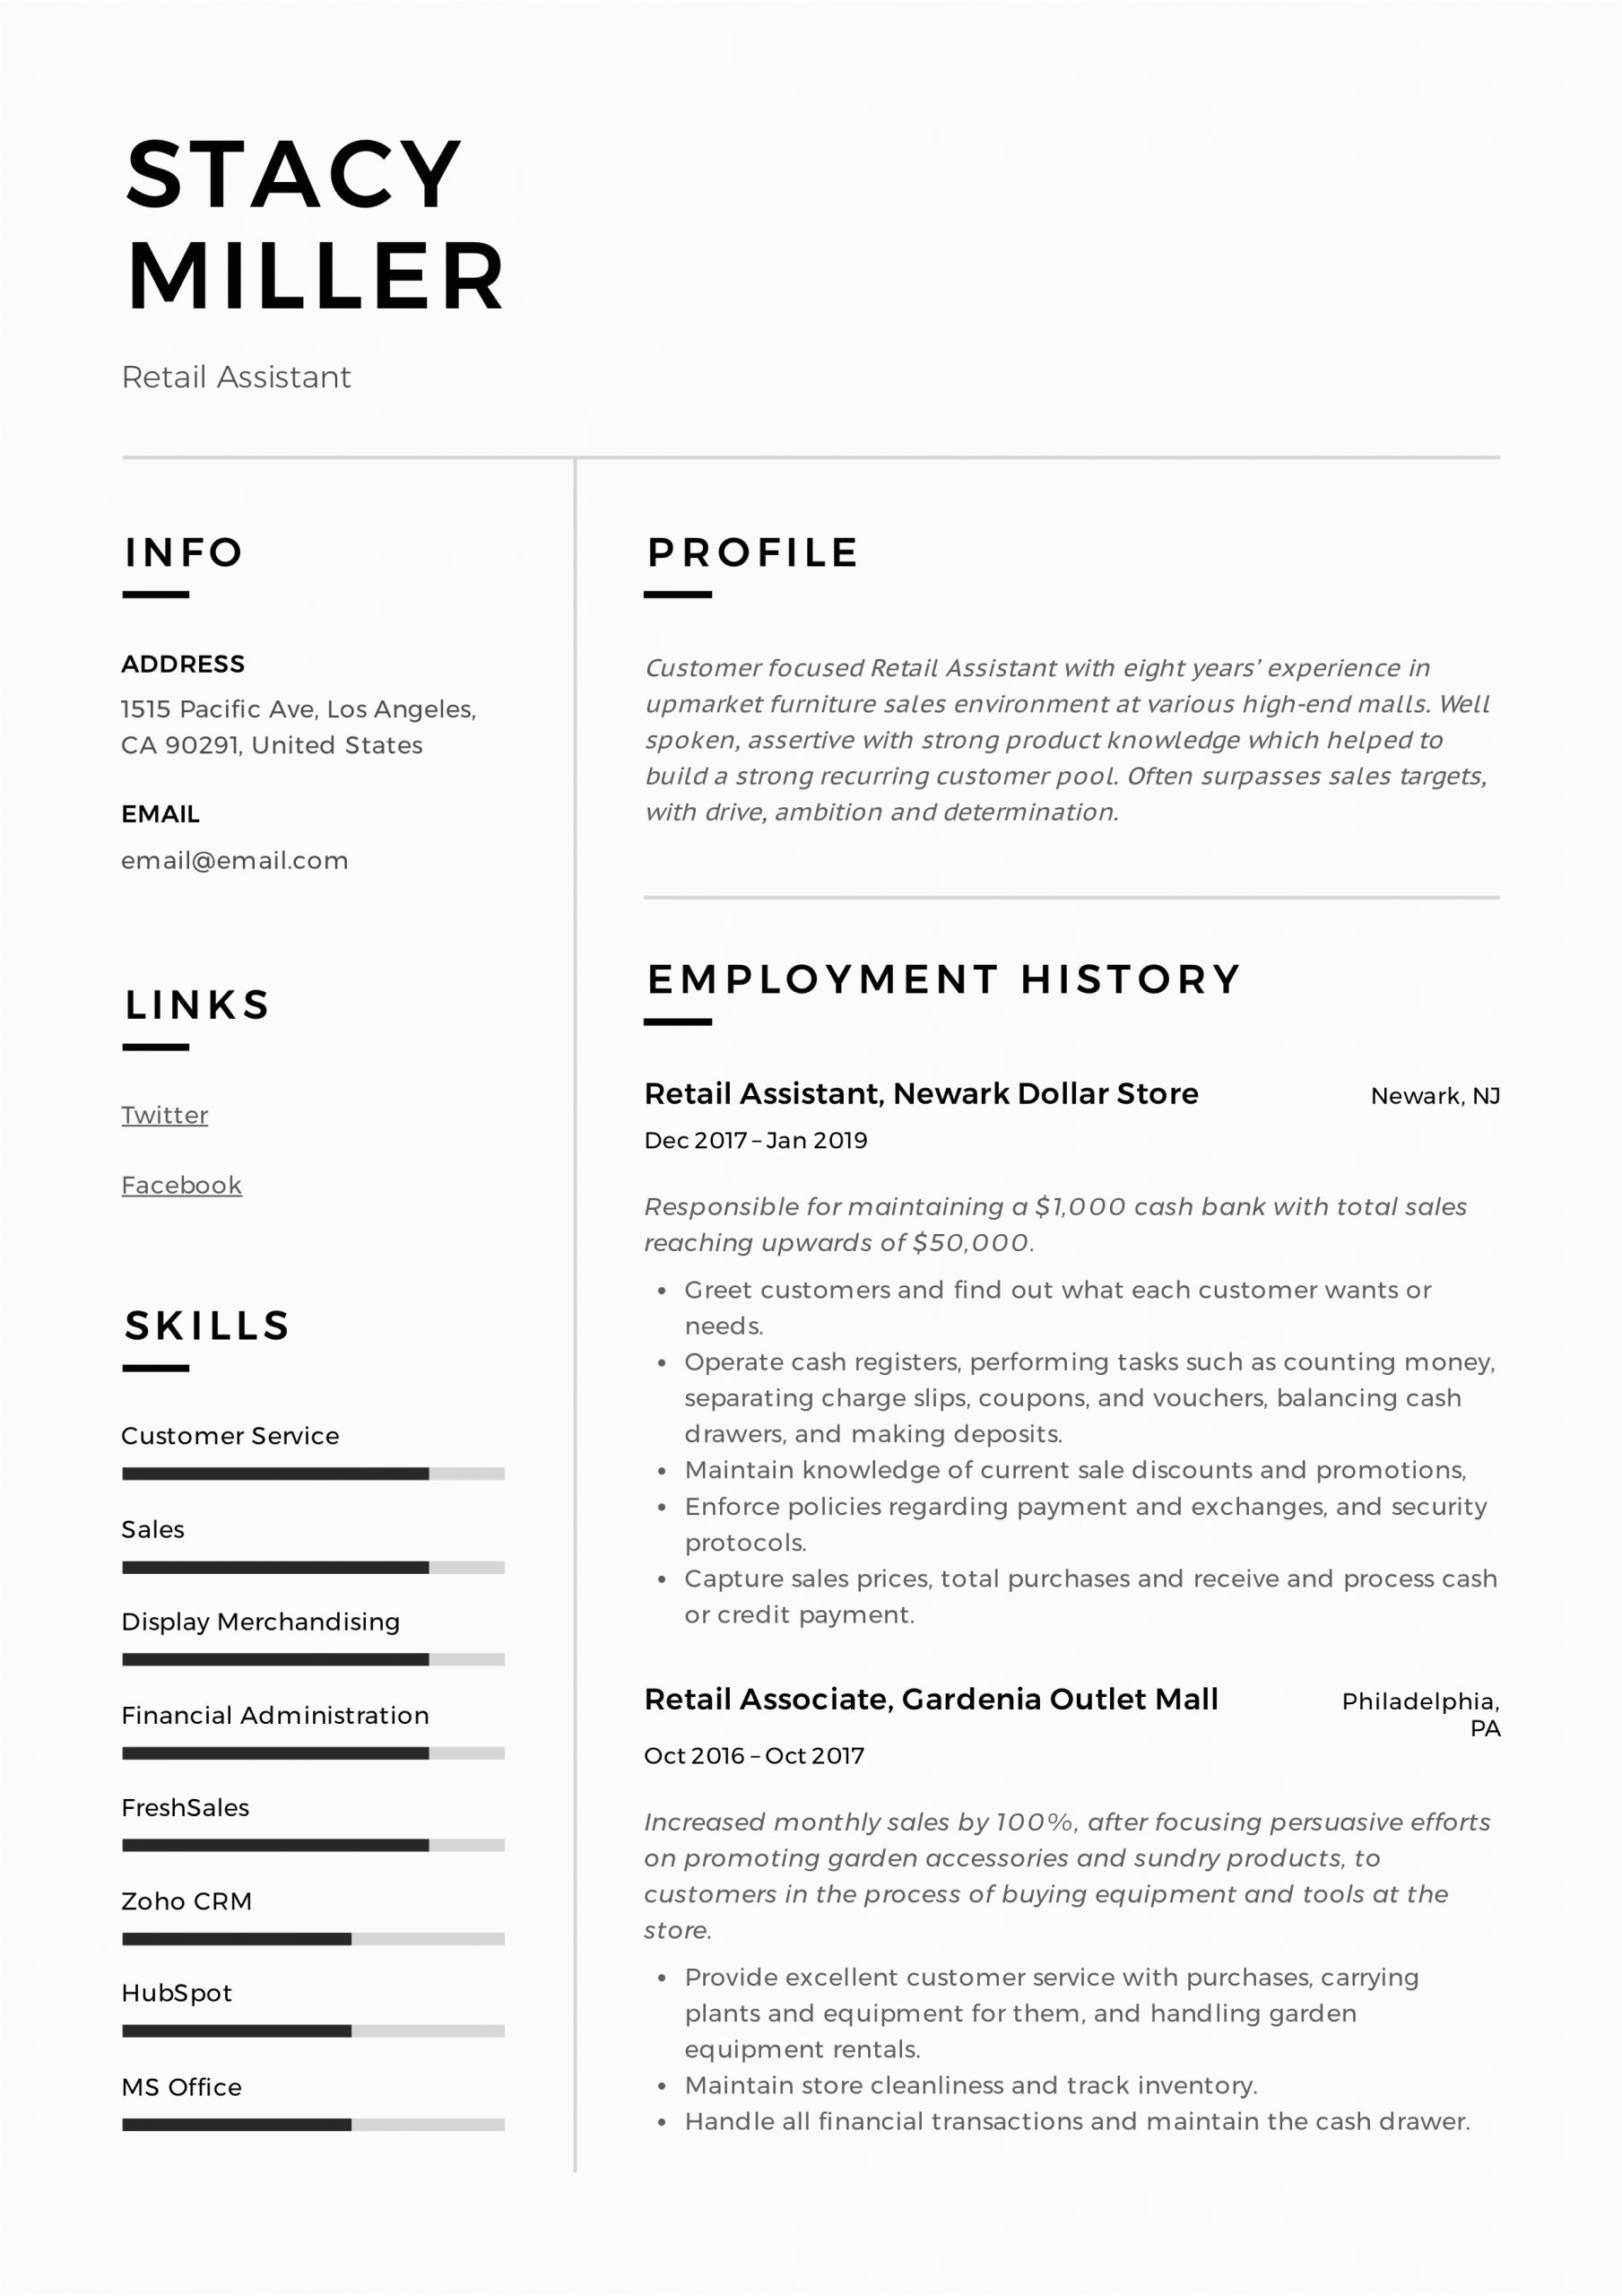 Sample Resume for Retail Shop assistant 12 Retail assistant Resume Samples & Writing Guide